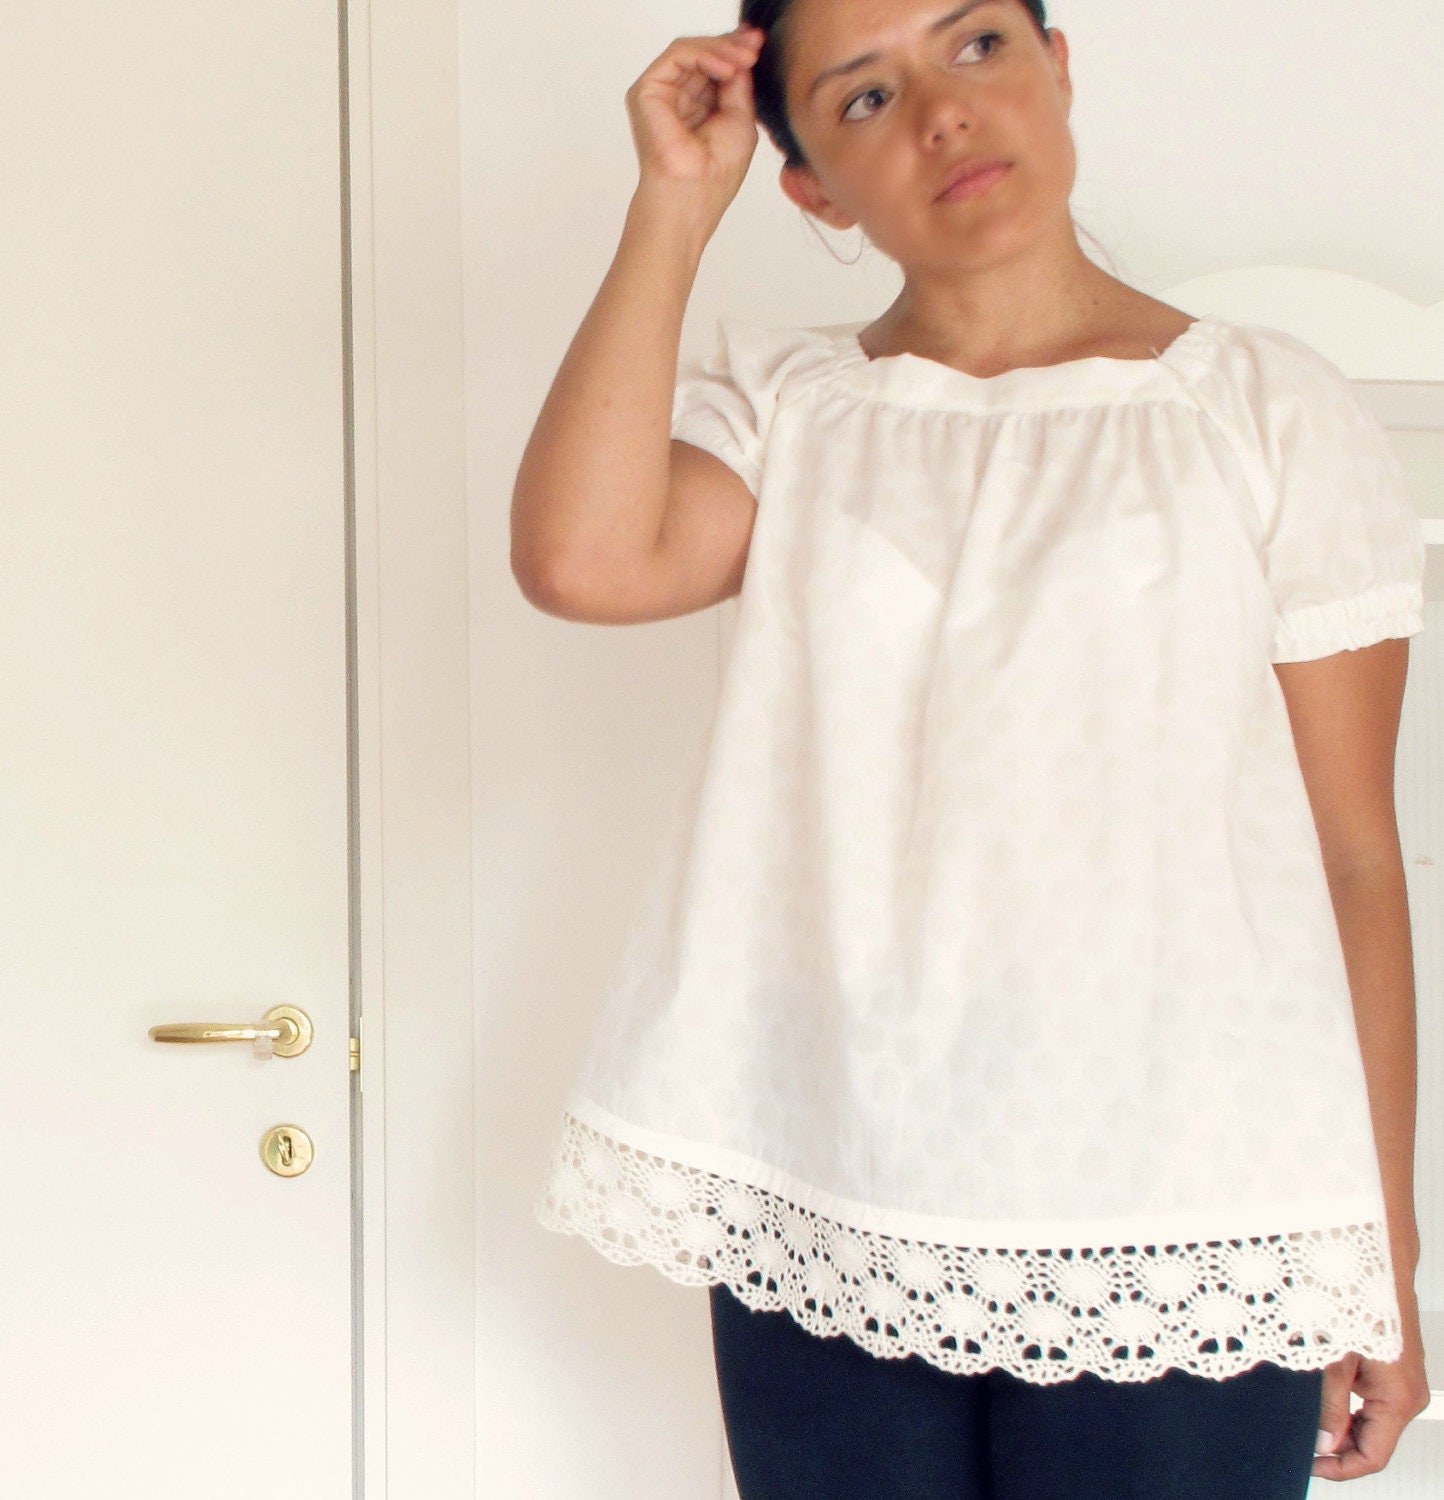 Women's blouse light cream, balloon sleeves shirt. Beige blouse, crocheted trim. Sizes US 2, 4, 6. Made to order. - arch190